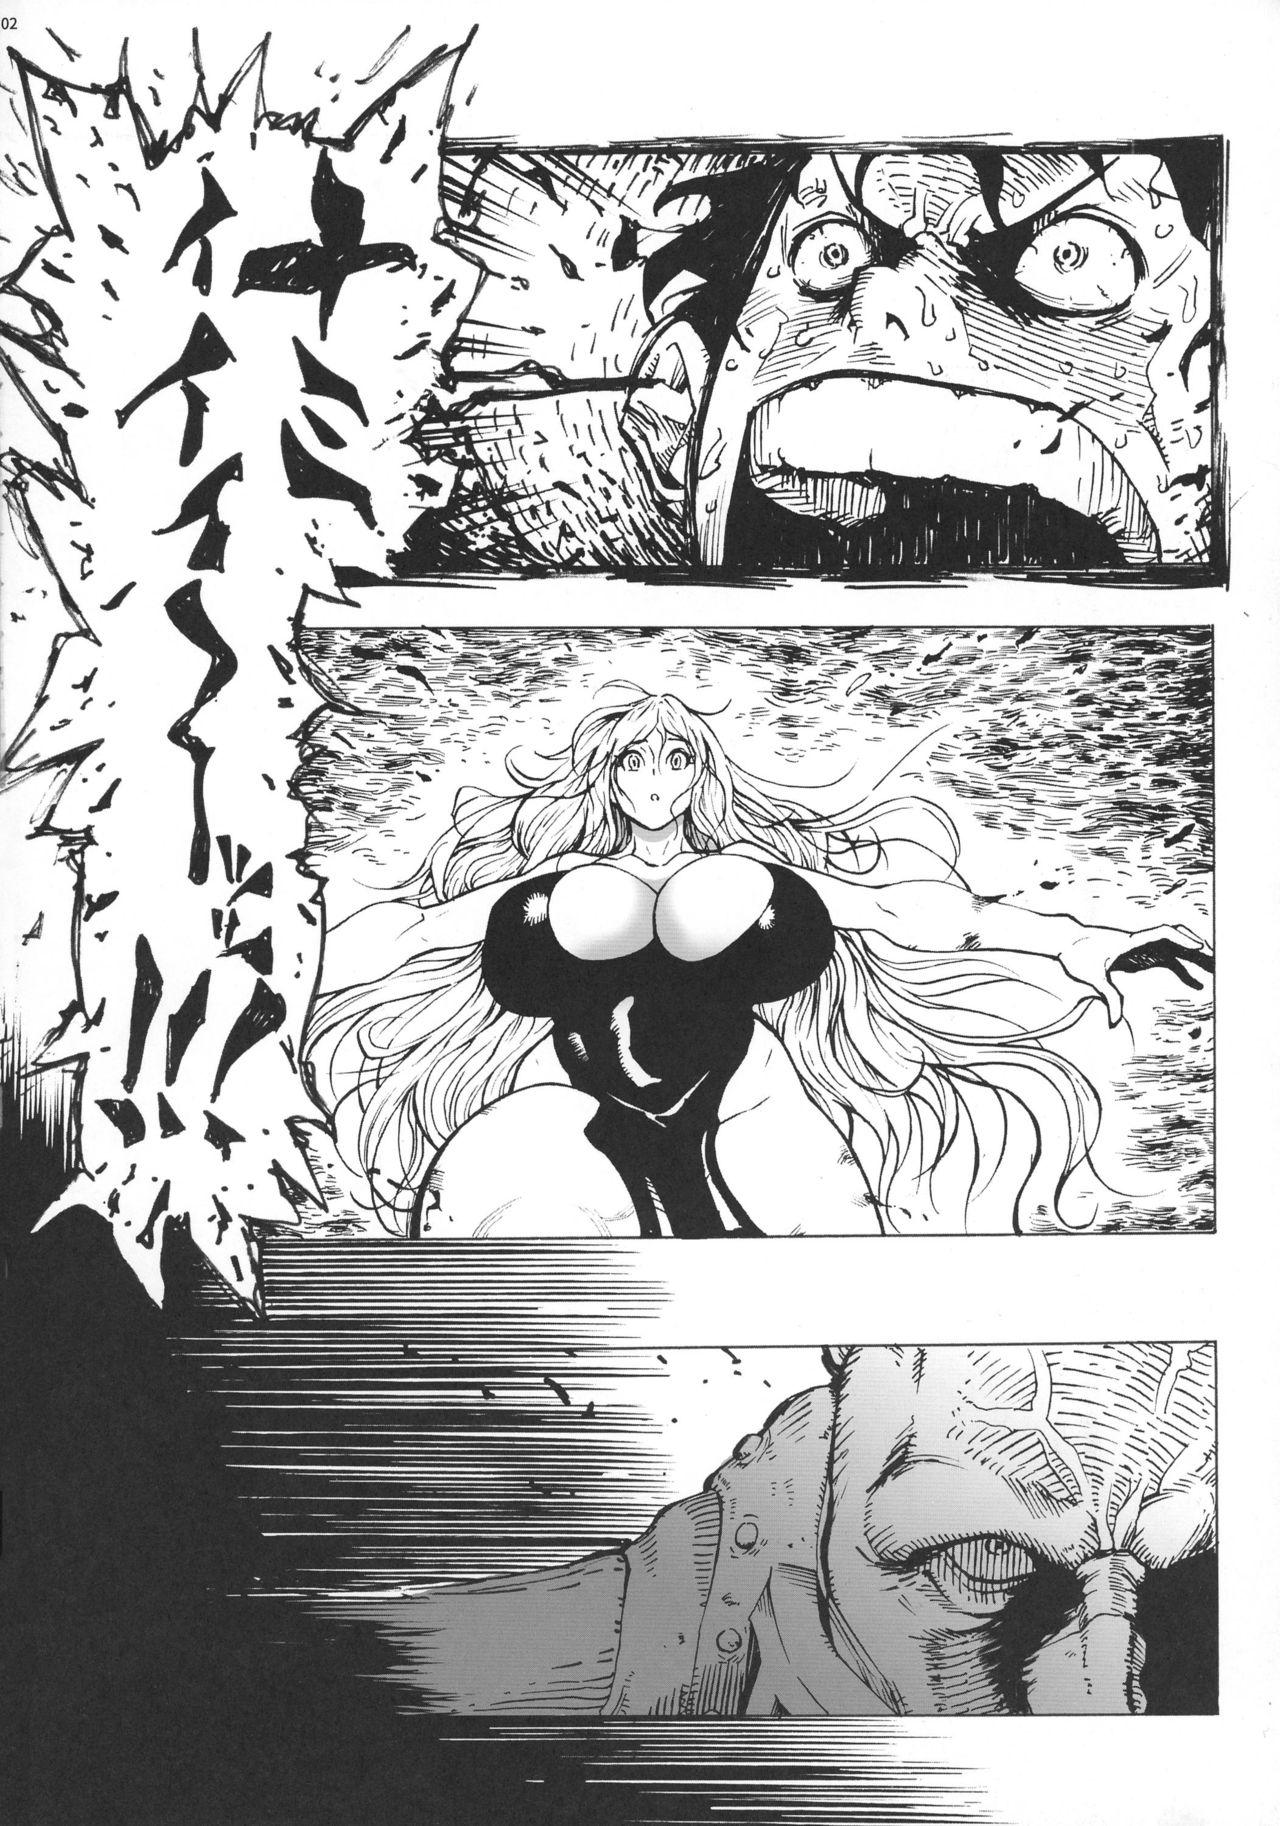 Uncut P.O.M Another Episode "J.A.C.K" - One piece Big breasts - Page 4